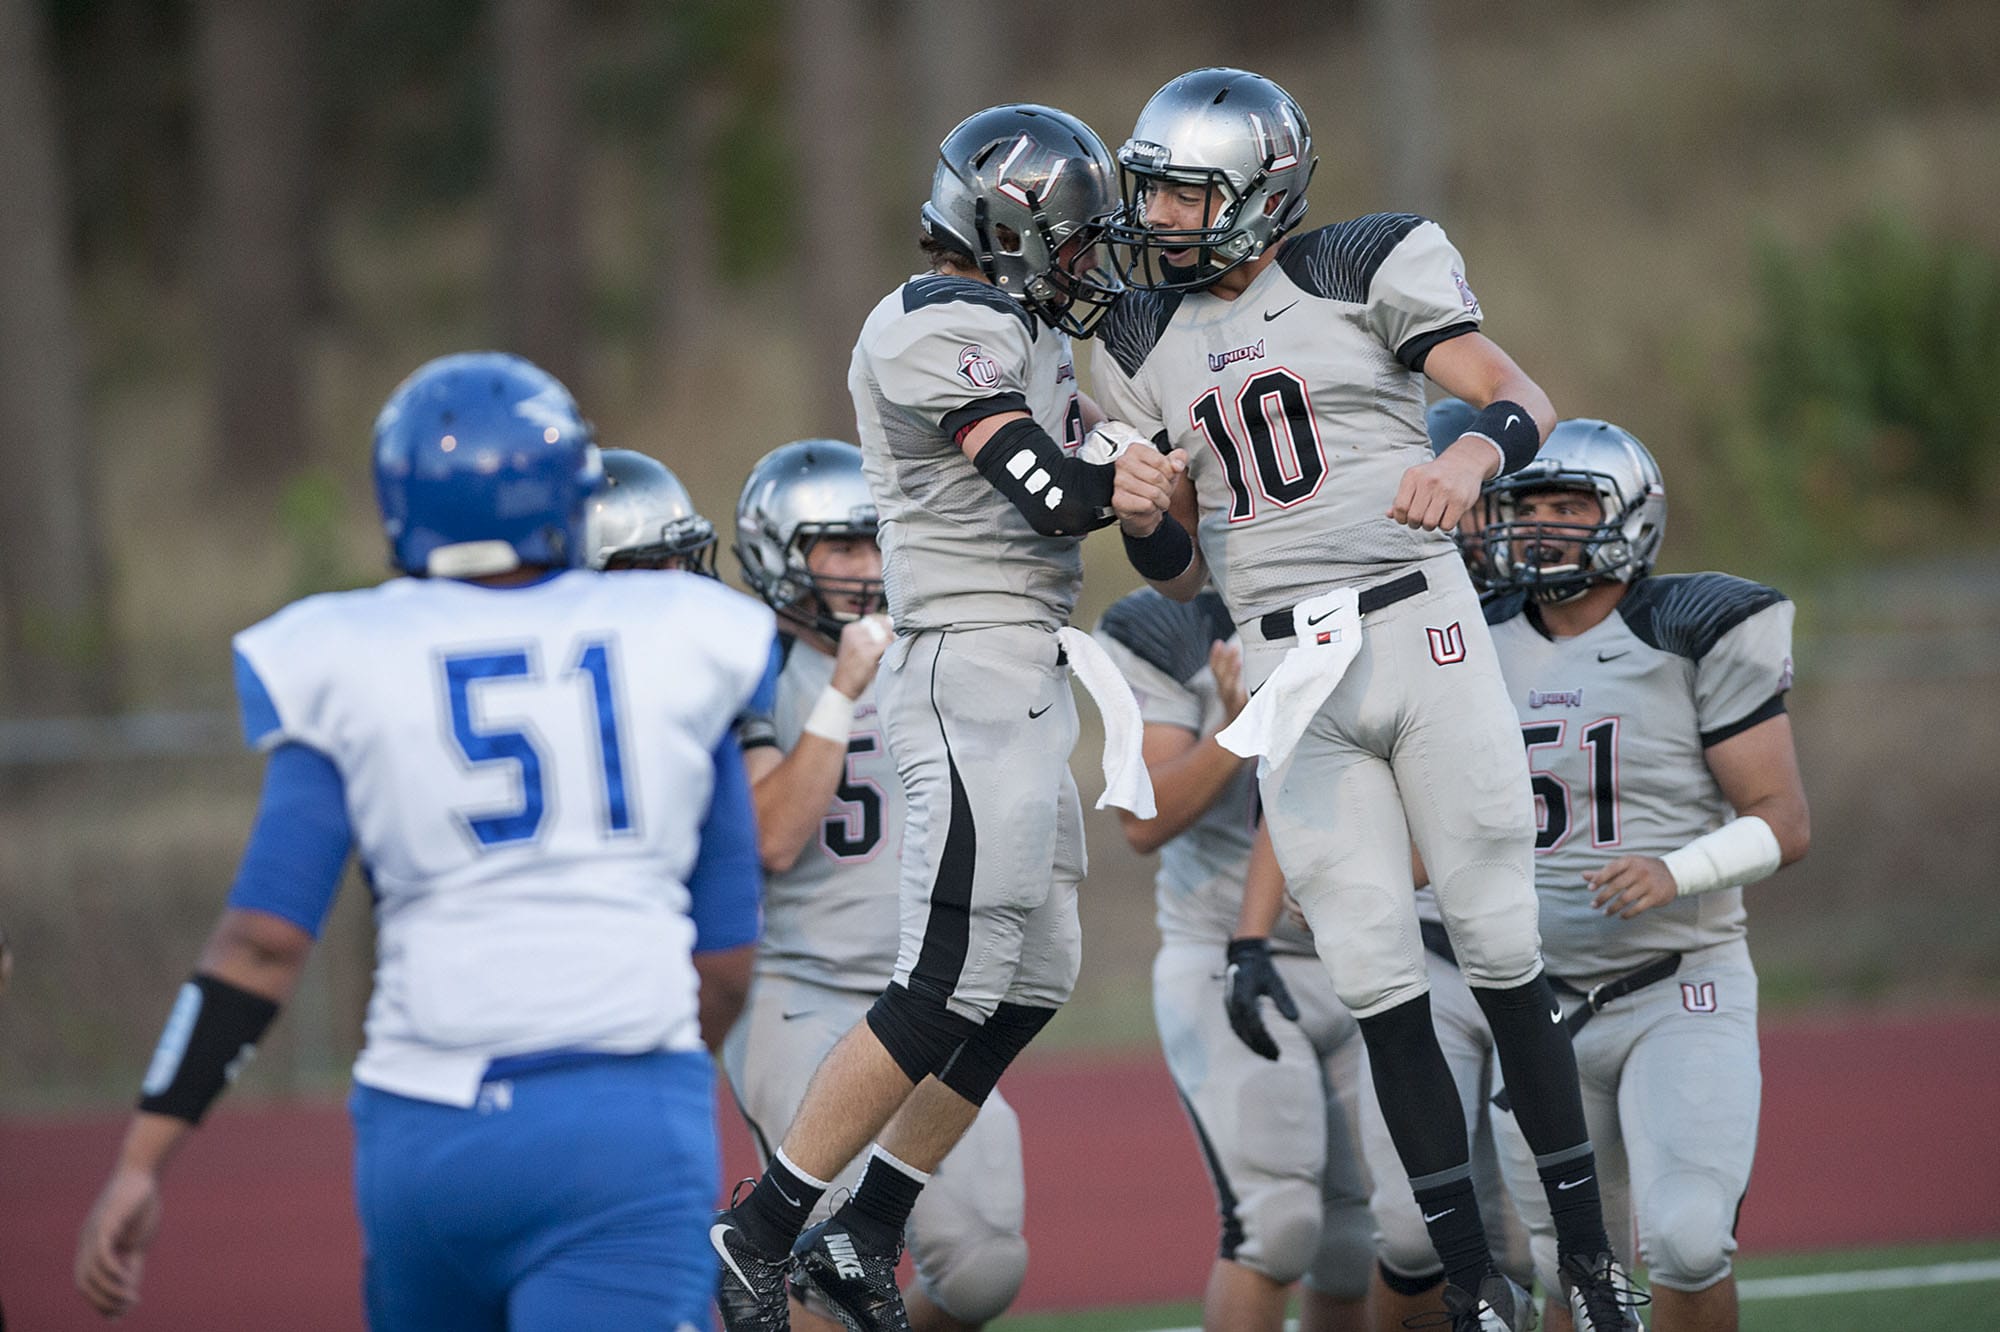 Union High School's Keithen Shepard, center, celebrates with teammates including Jordan Lawson (10) after scoring a touchdown in the first quarter as Federal Way's Oly Leonardo (51) walks past Friday night, Sept.